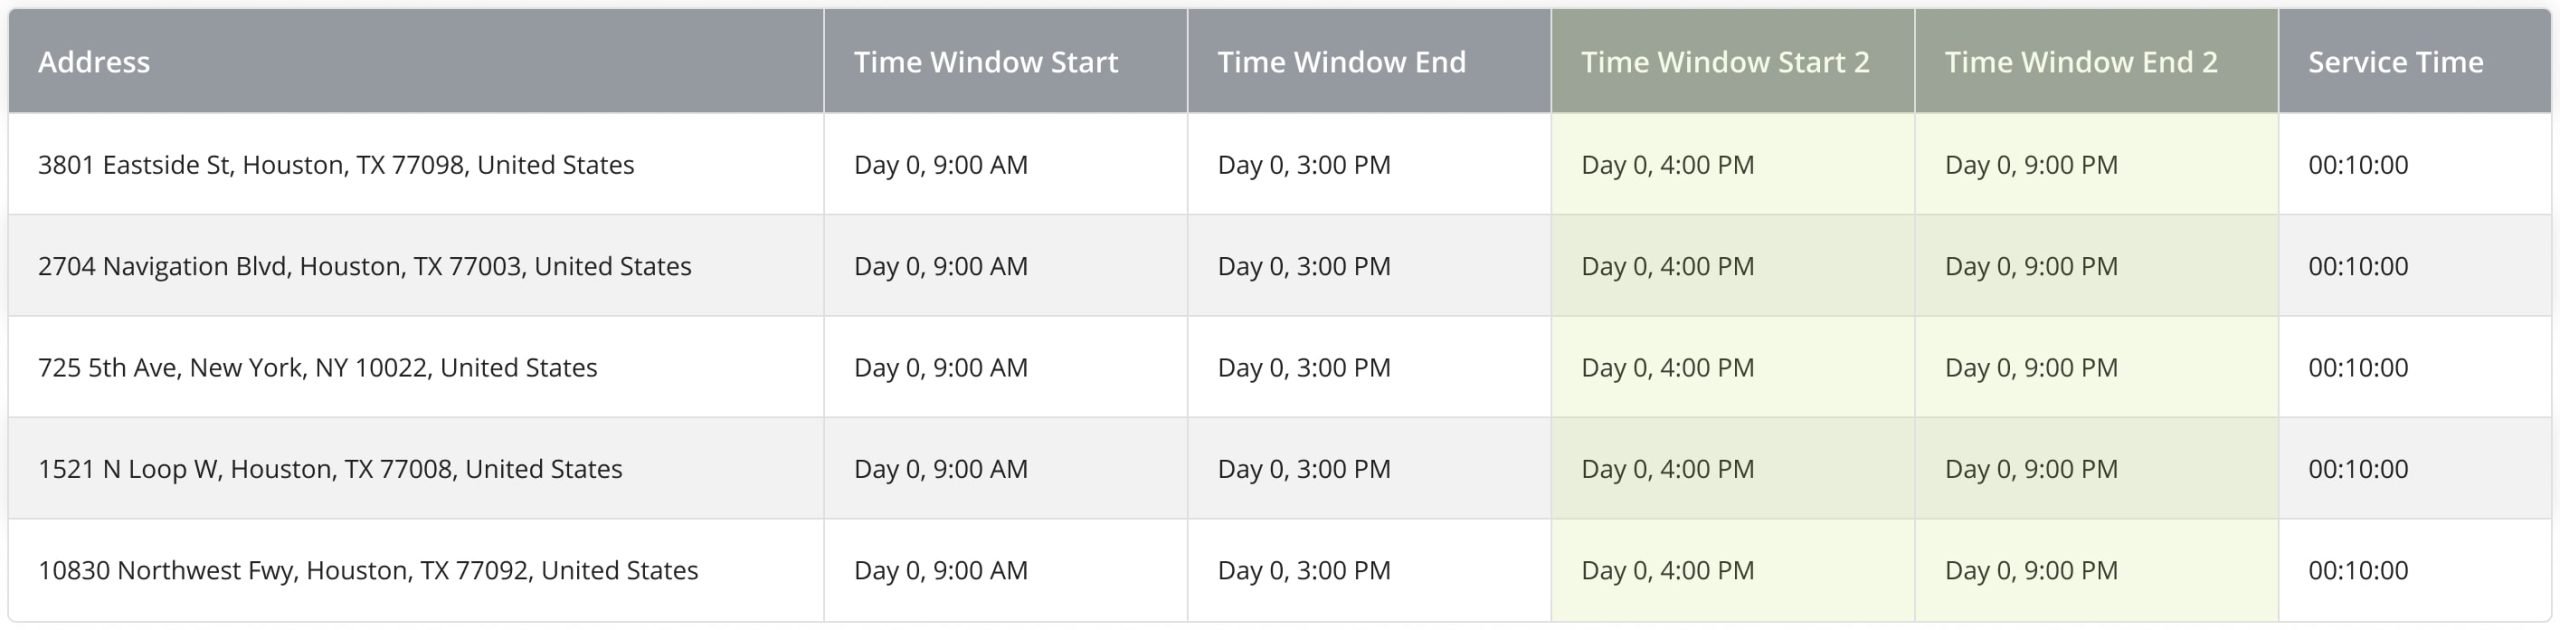 Add secondary customer working hours to the route spreadsheet for Time Windows route planning and optimization.